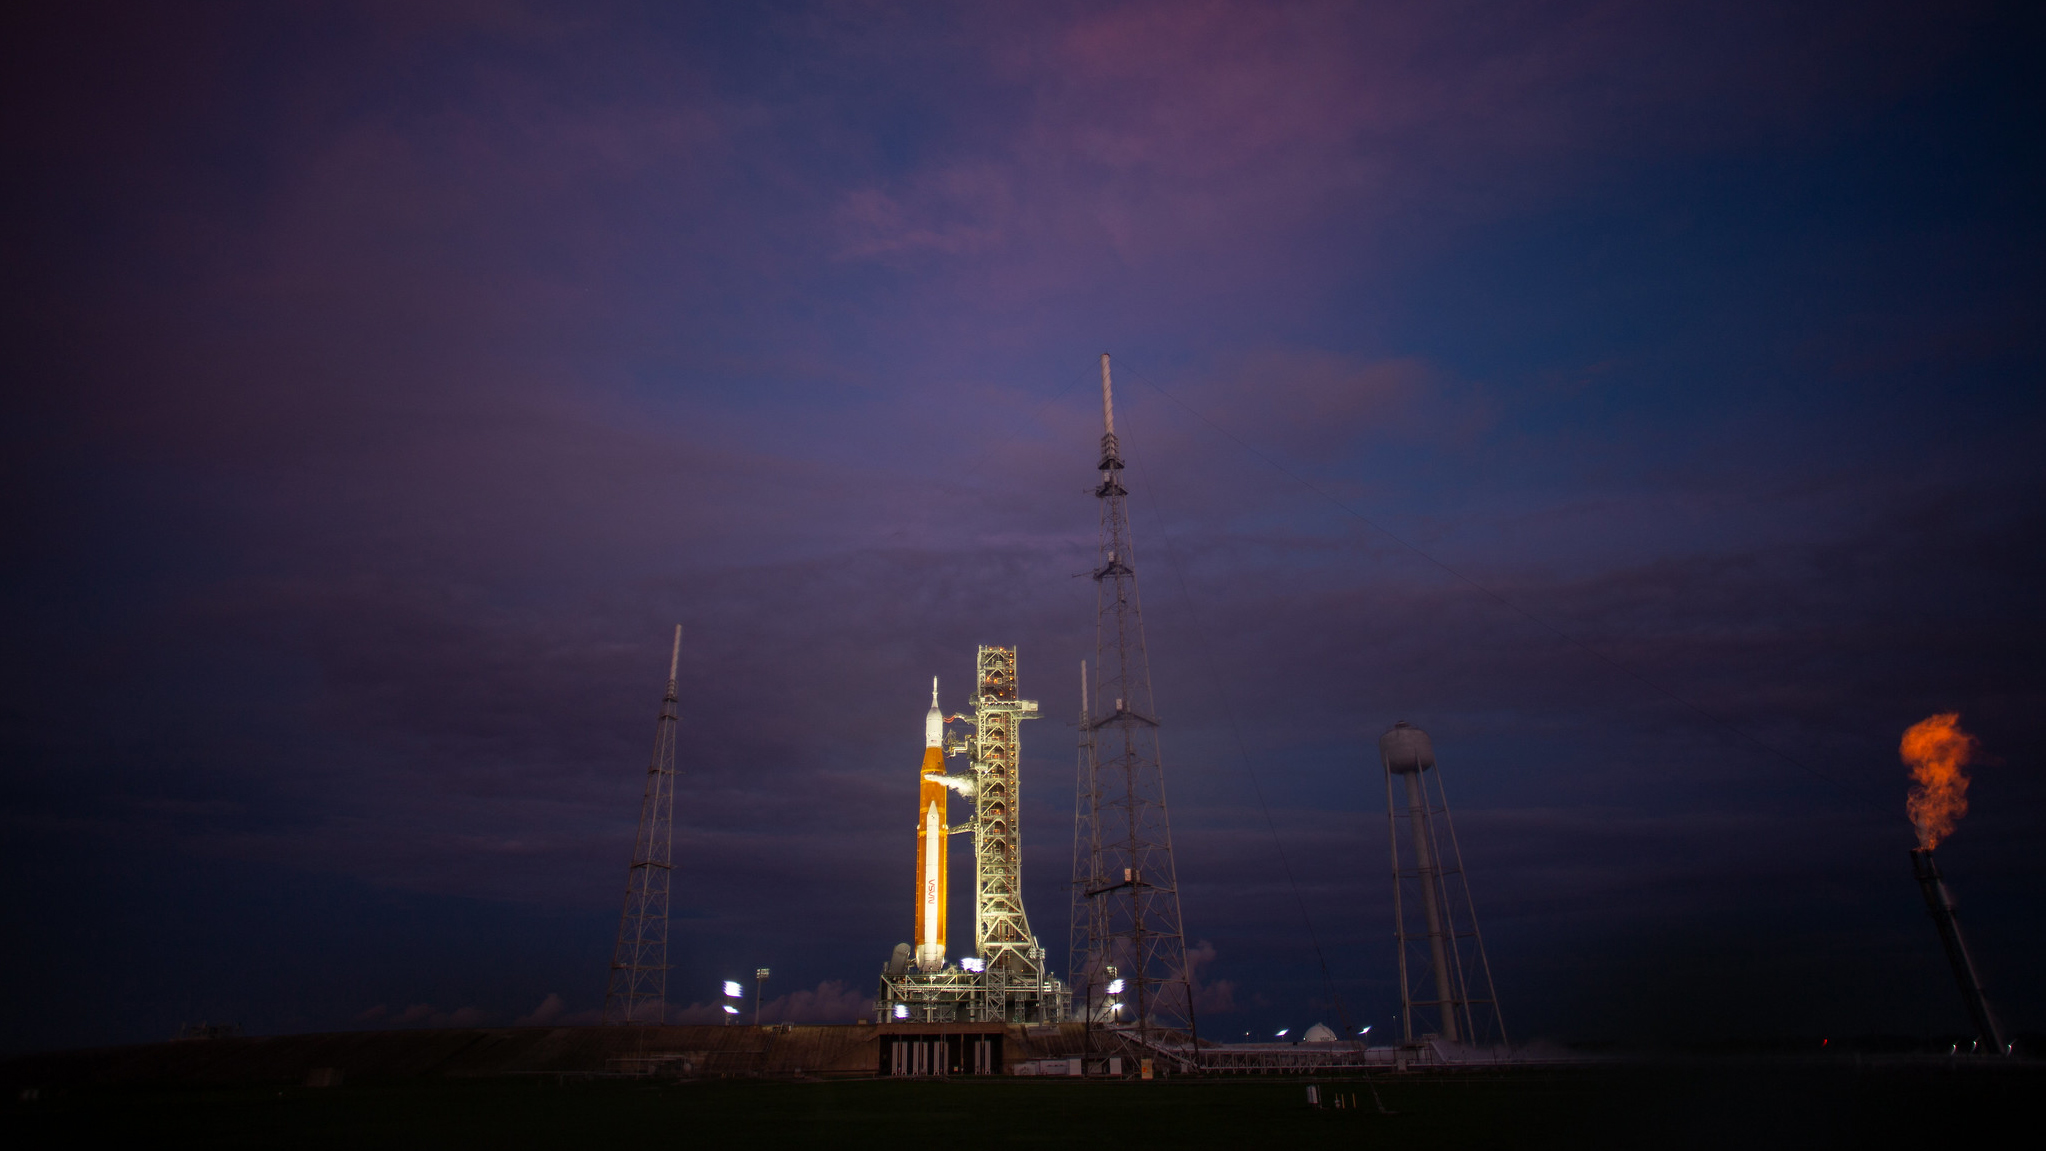 NASA's Space Launch System rocket at dawn on Thursday (Sept.1), waiting on Launch Pad 39B at NASA's Kennedy Space Center in Florida for its second launch attempt.